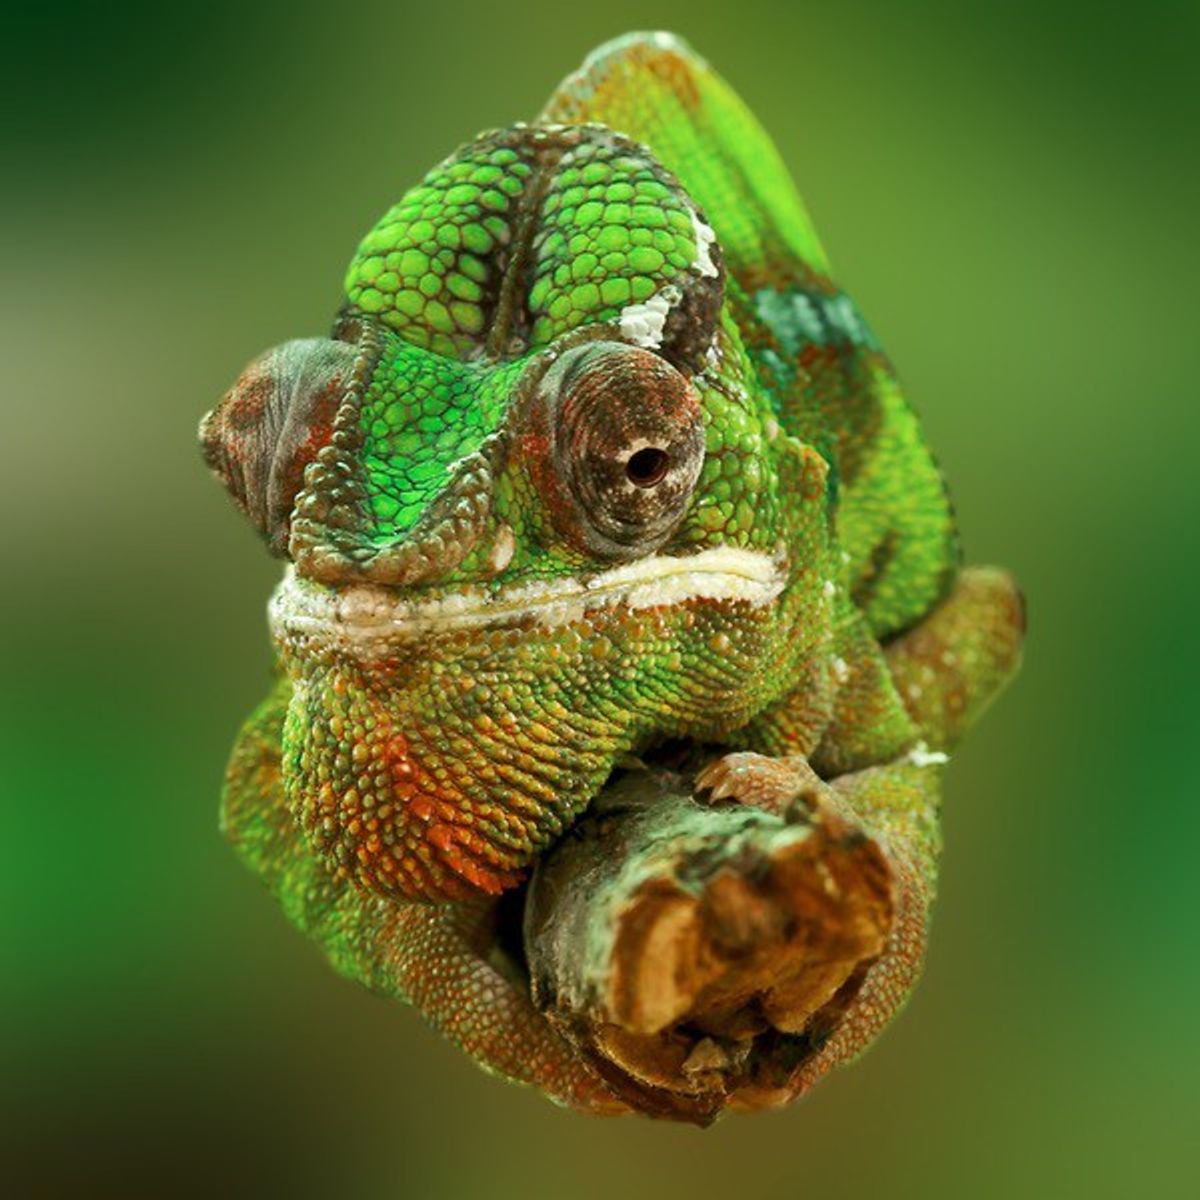 5 Interesting Facts About Chameleons